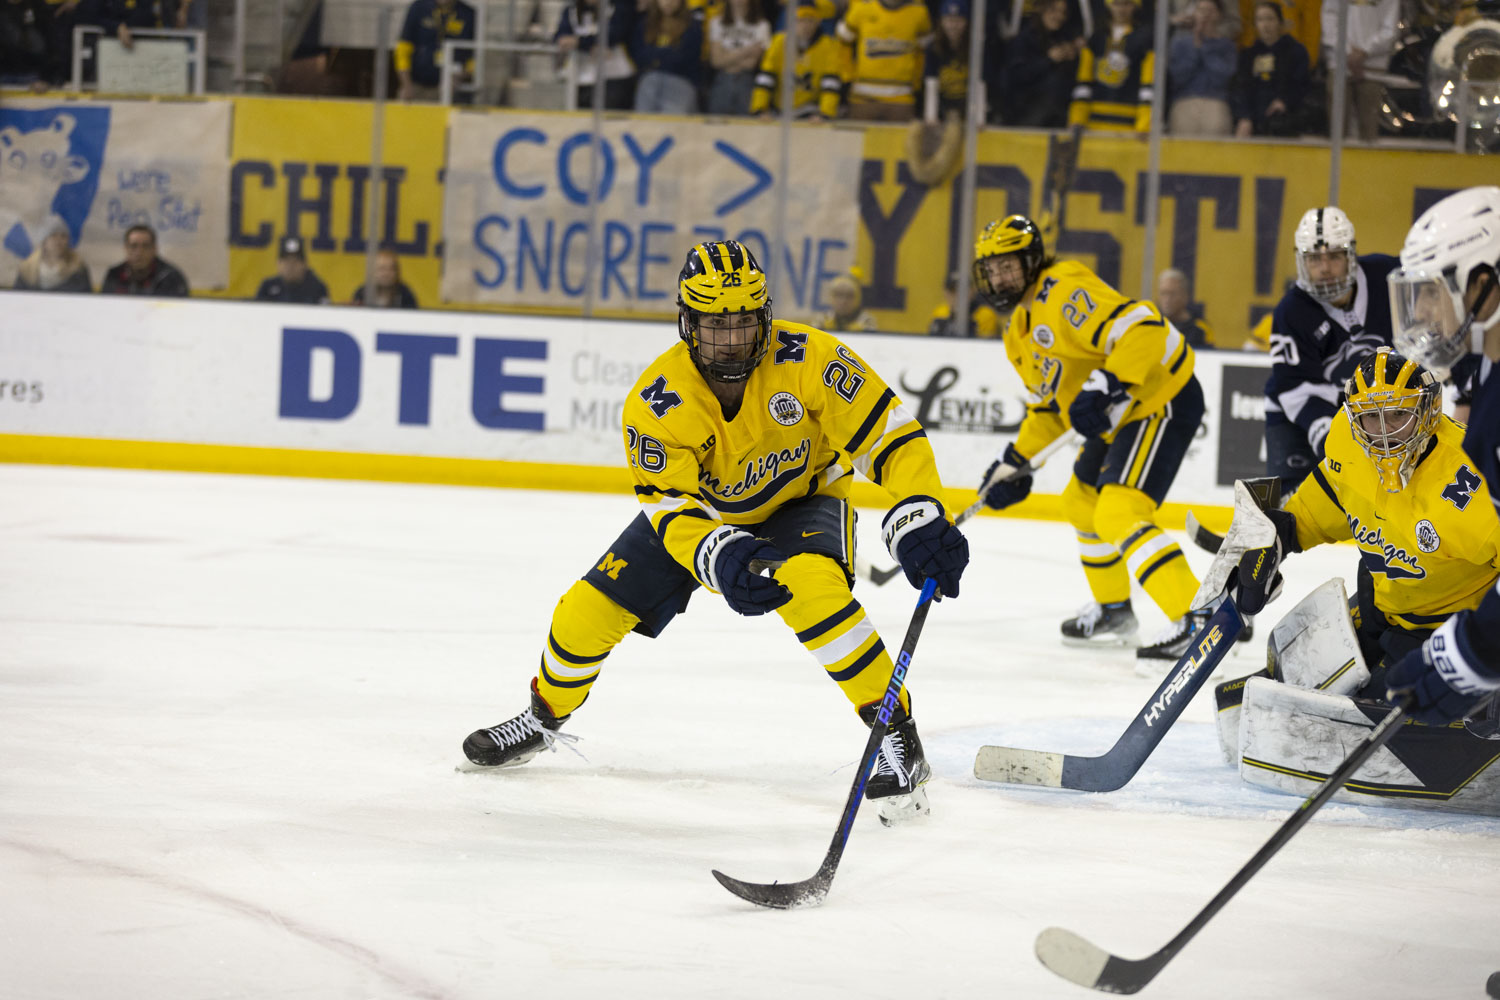 Casey Selected in Second Round of NHL Draft by New Jersey Devils -  University of Michigan Athletics